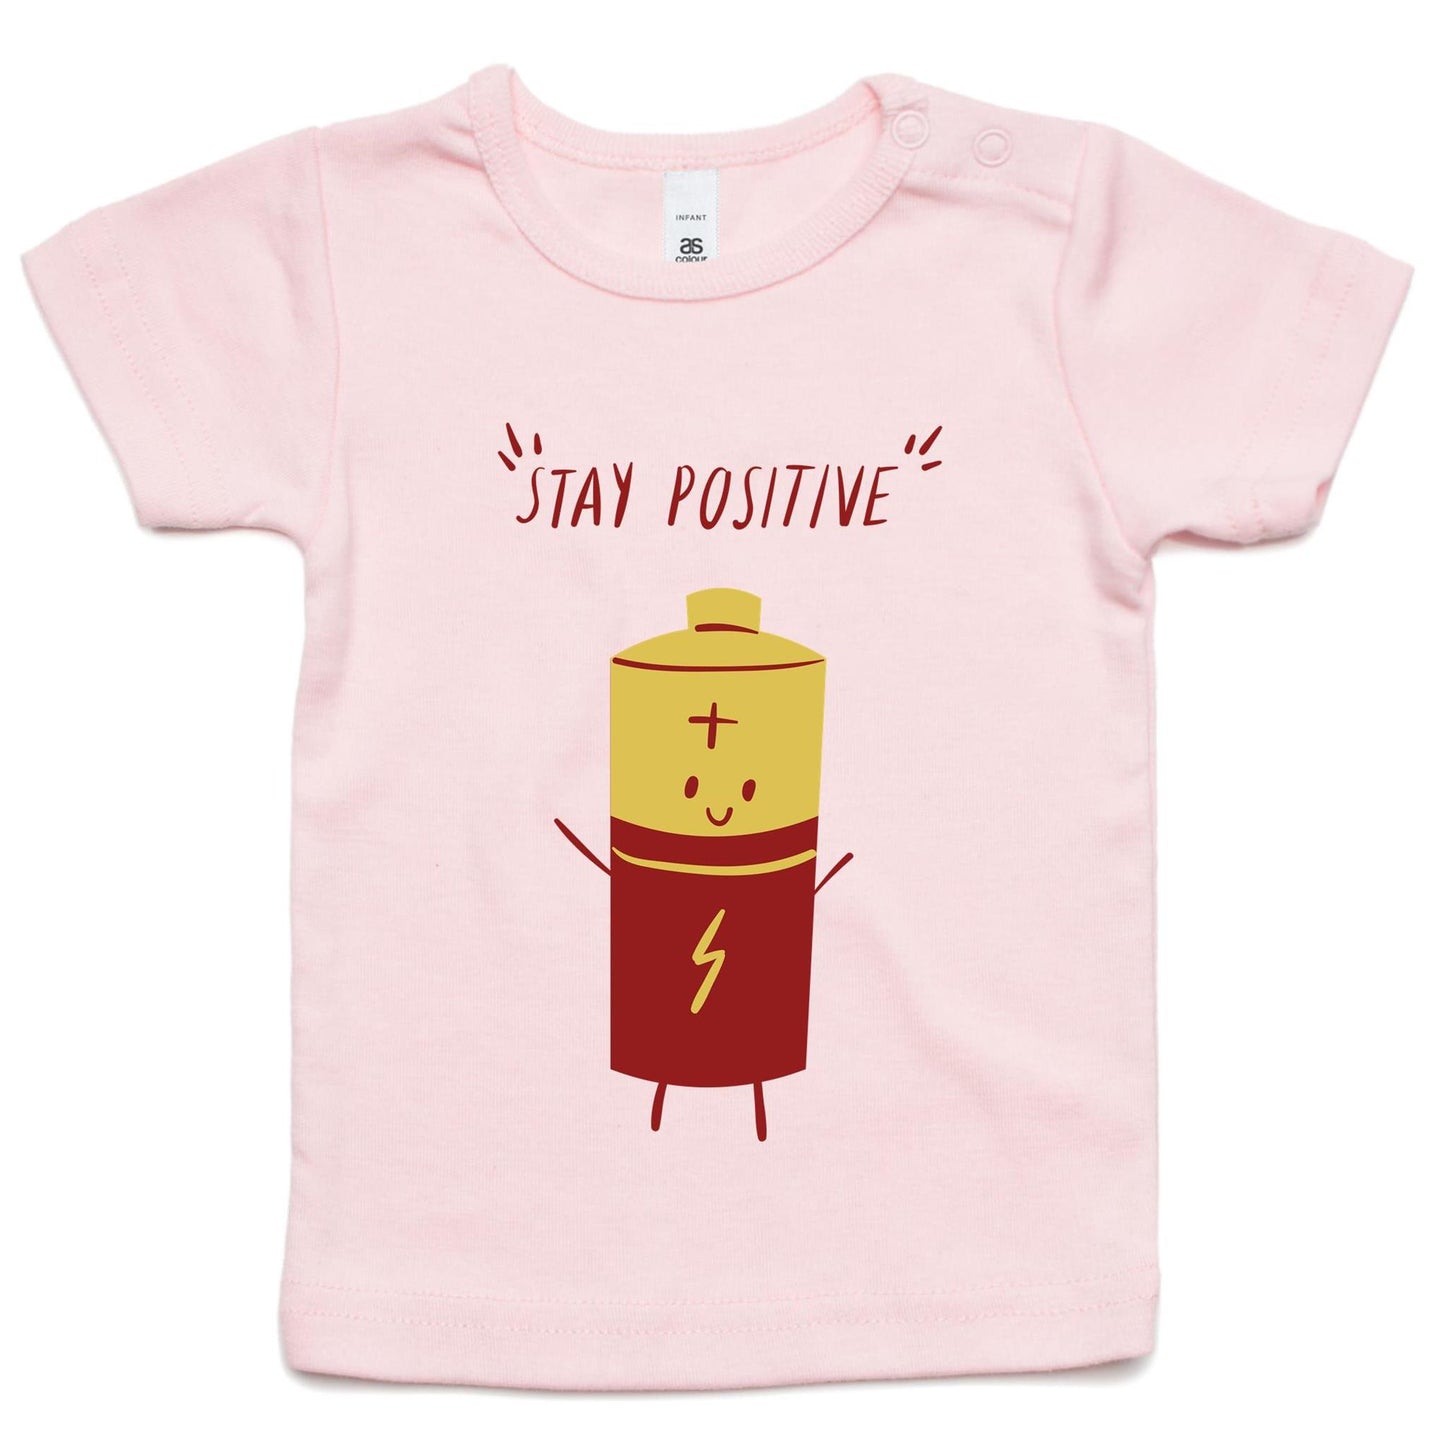 Stay Positive - Baby T-shirt Pink Baby T-shirt kids